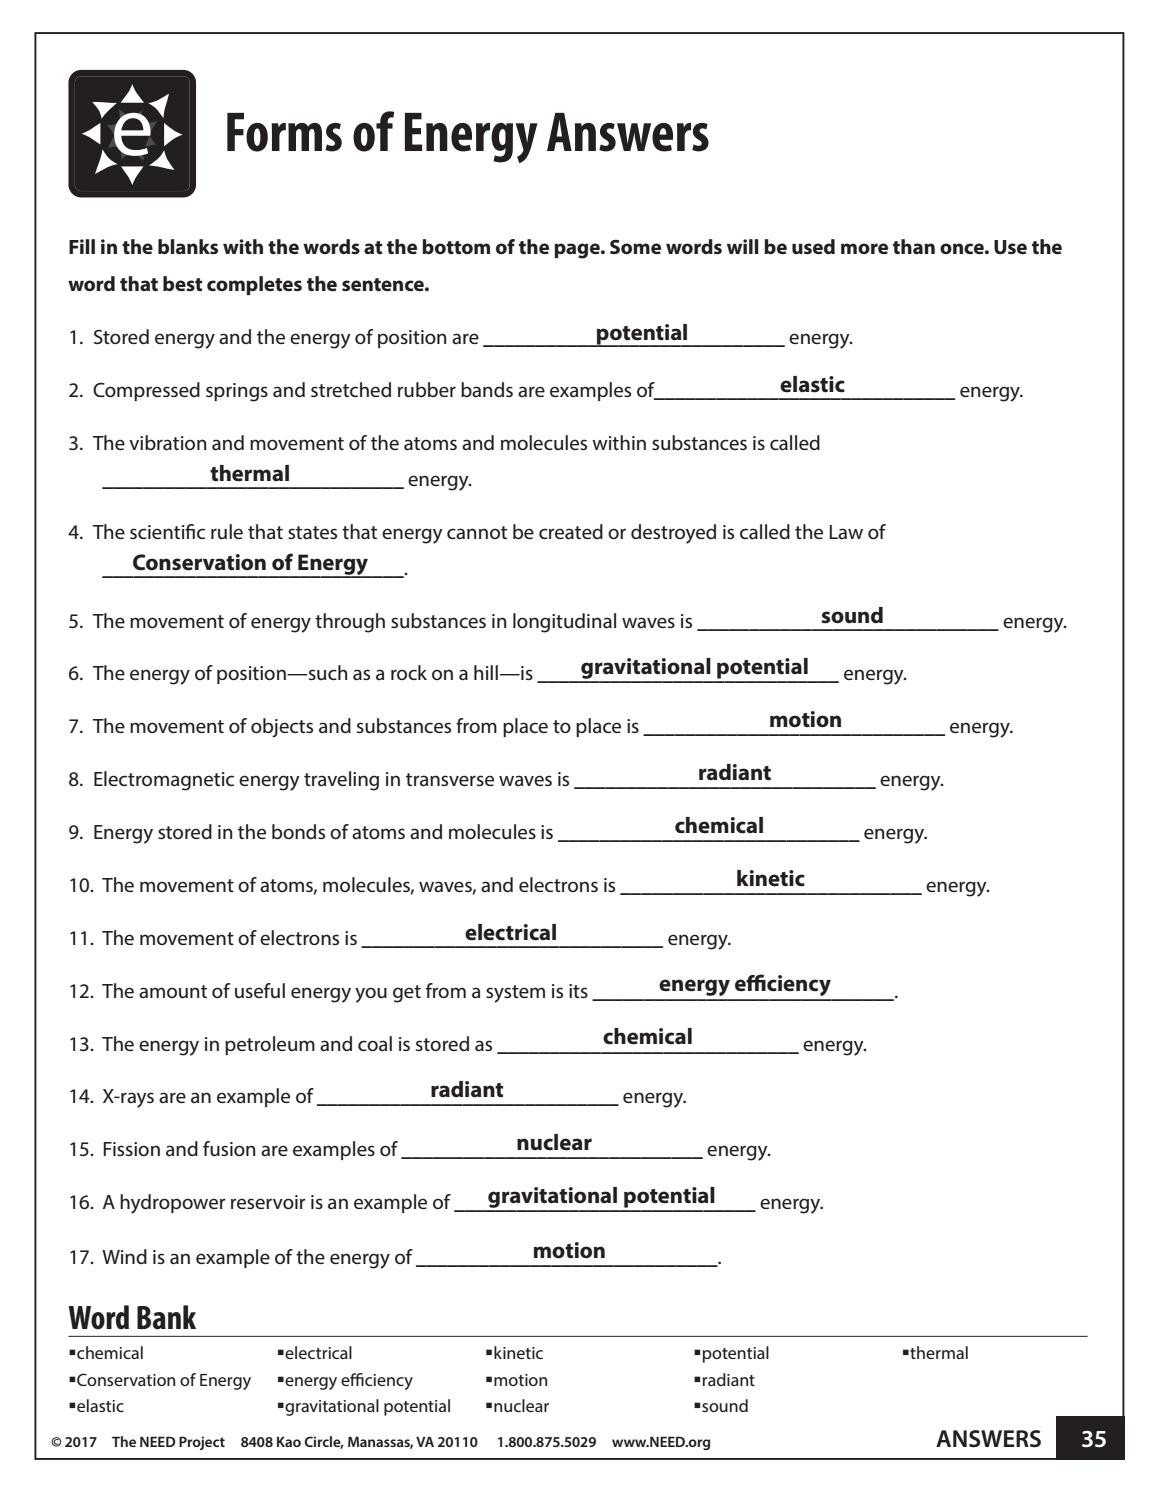 Conservation Of Energy Worksheet Answers Intermediate Energy Infobook Activities by Need Project issuu